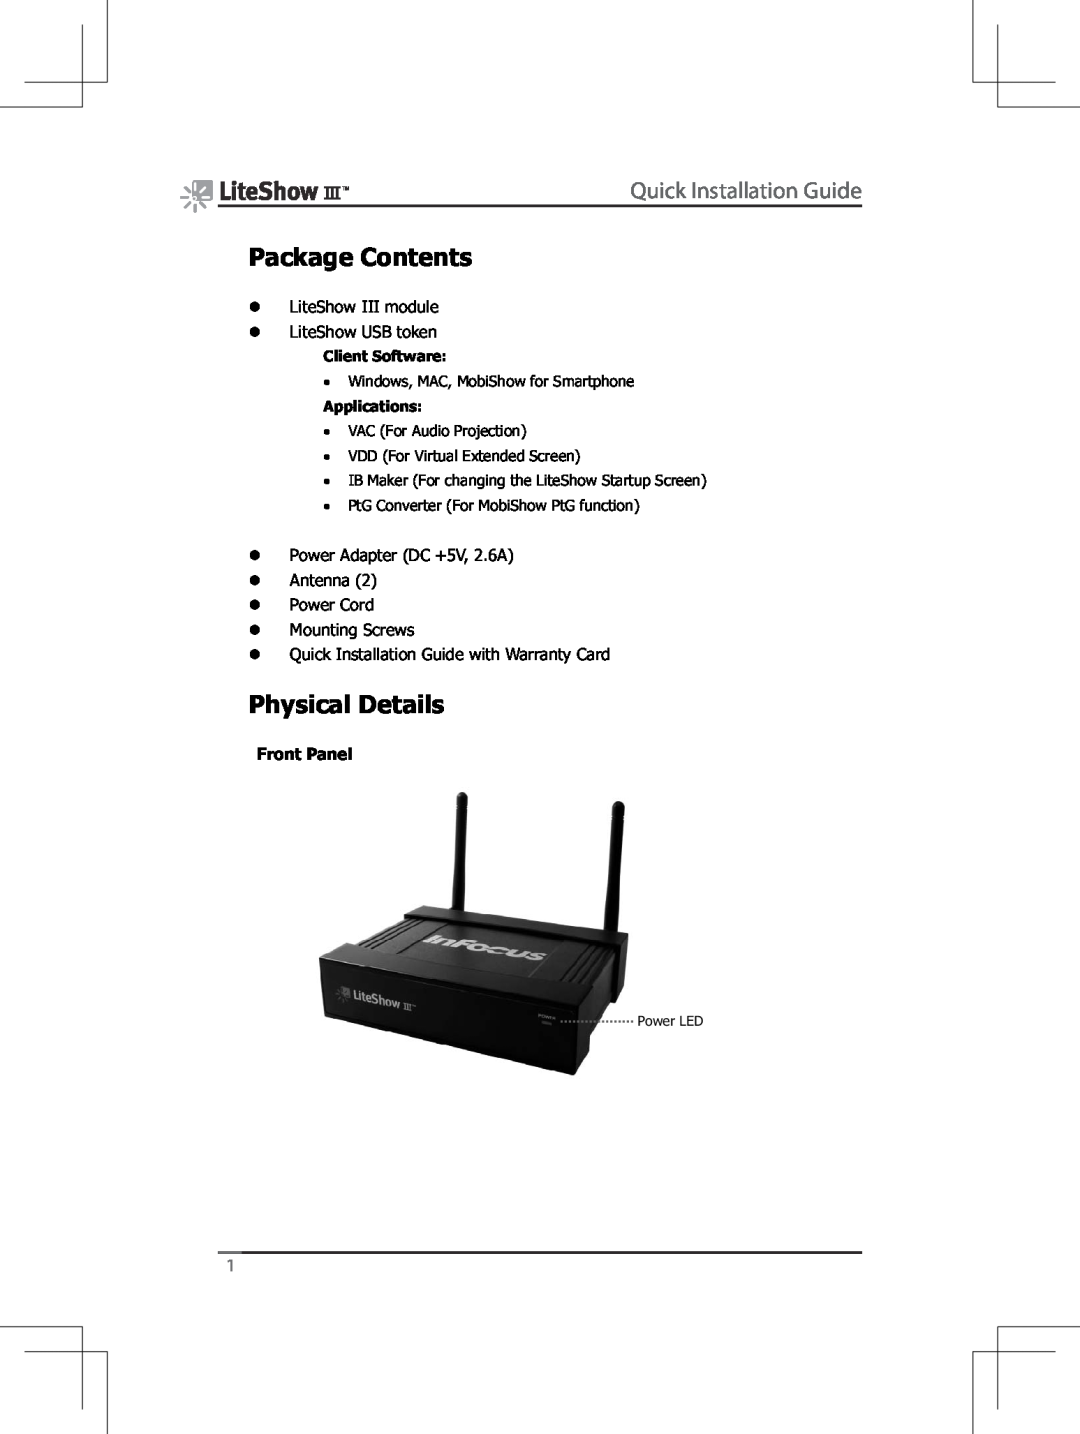 InFocus INLITESHOW3 Quick Installation Guide, Package Contents, Physical Details, Front Panel, Client Software, Power LED 